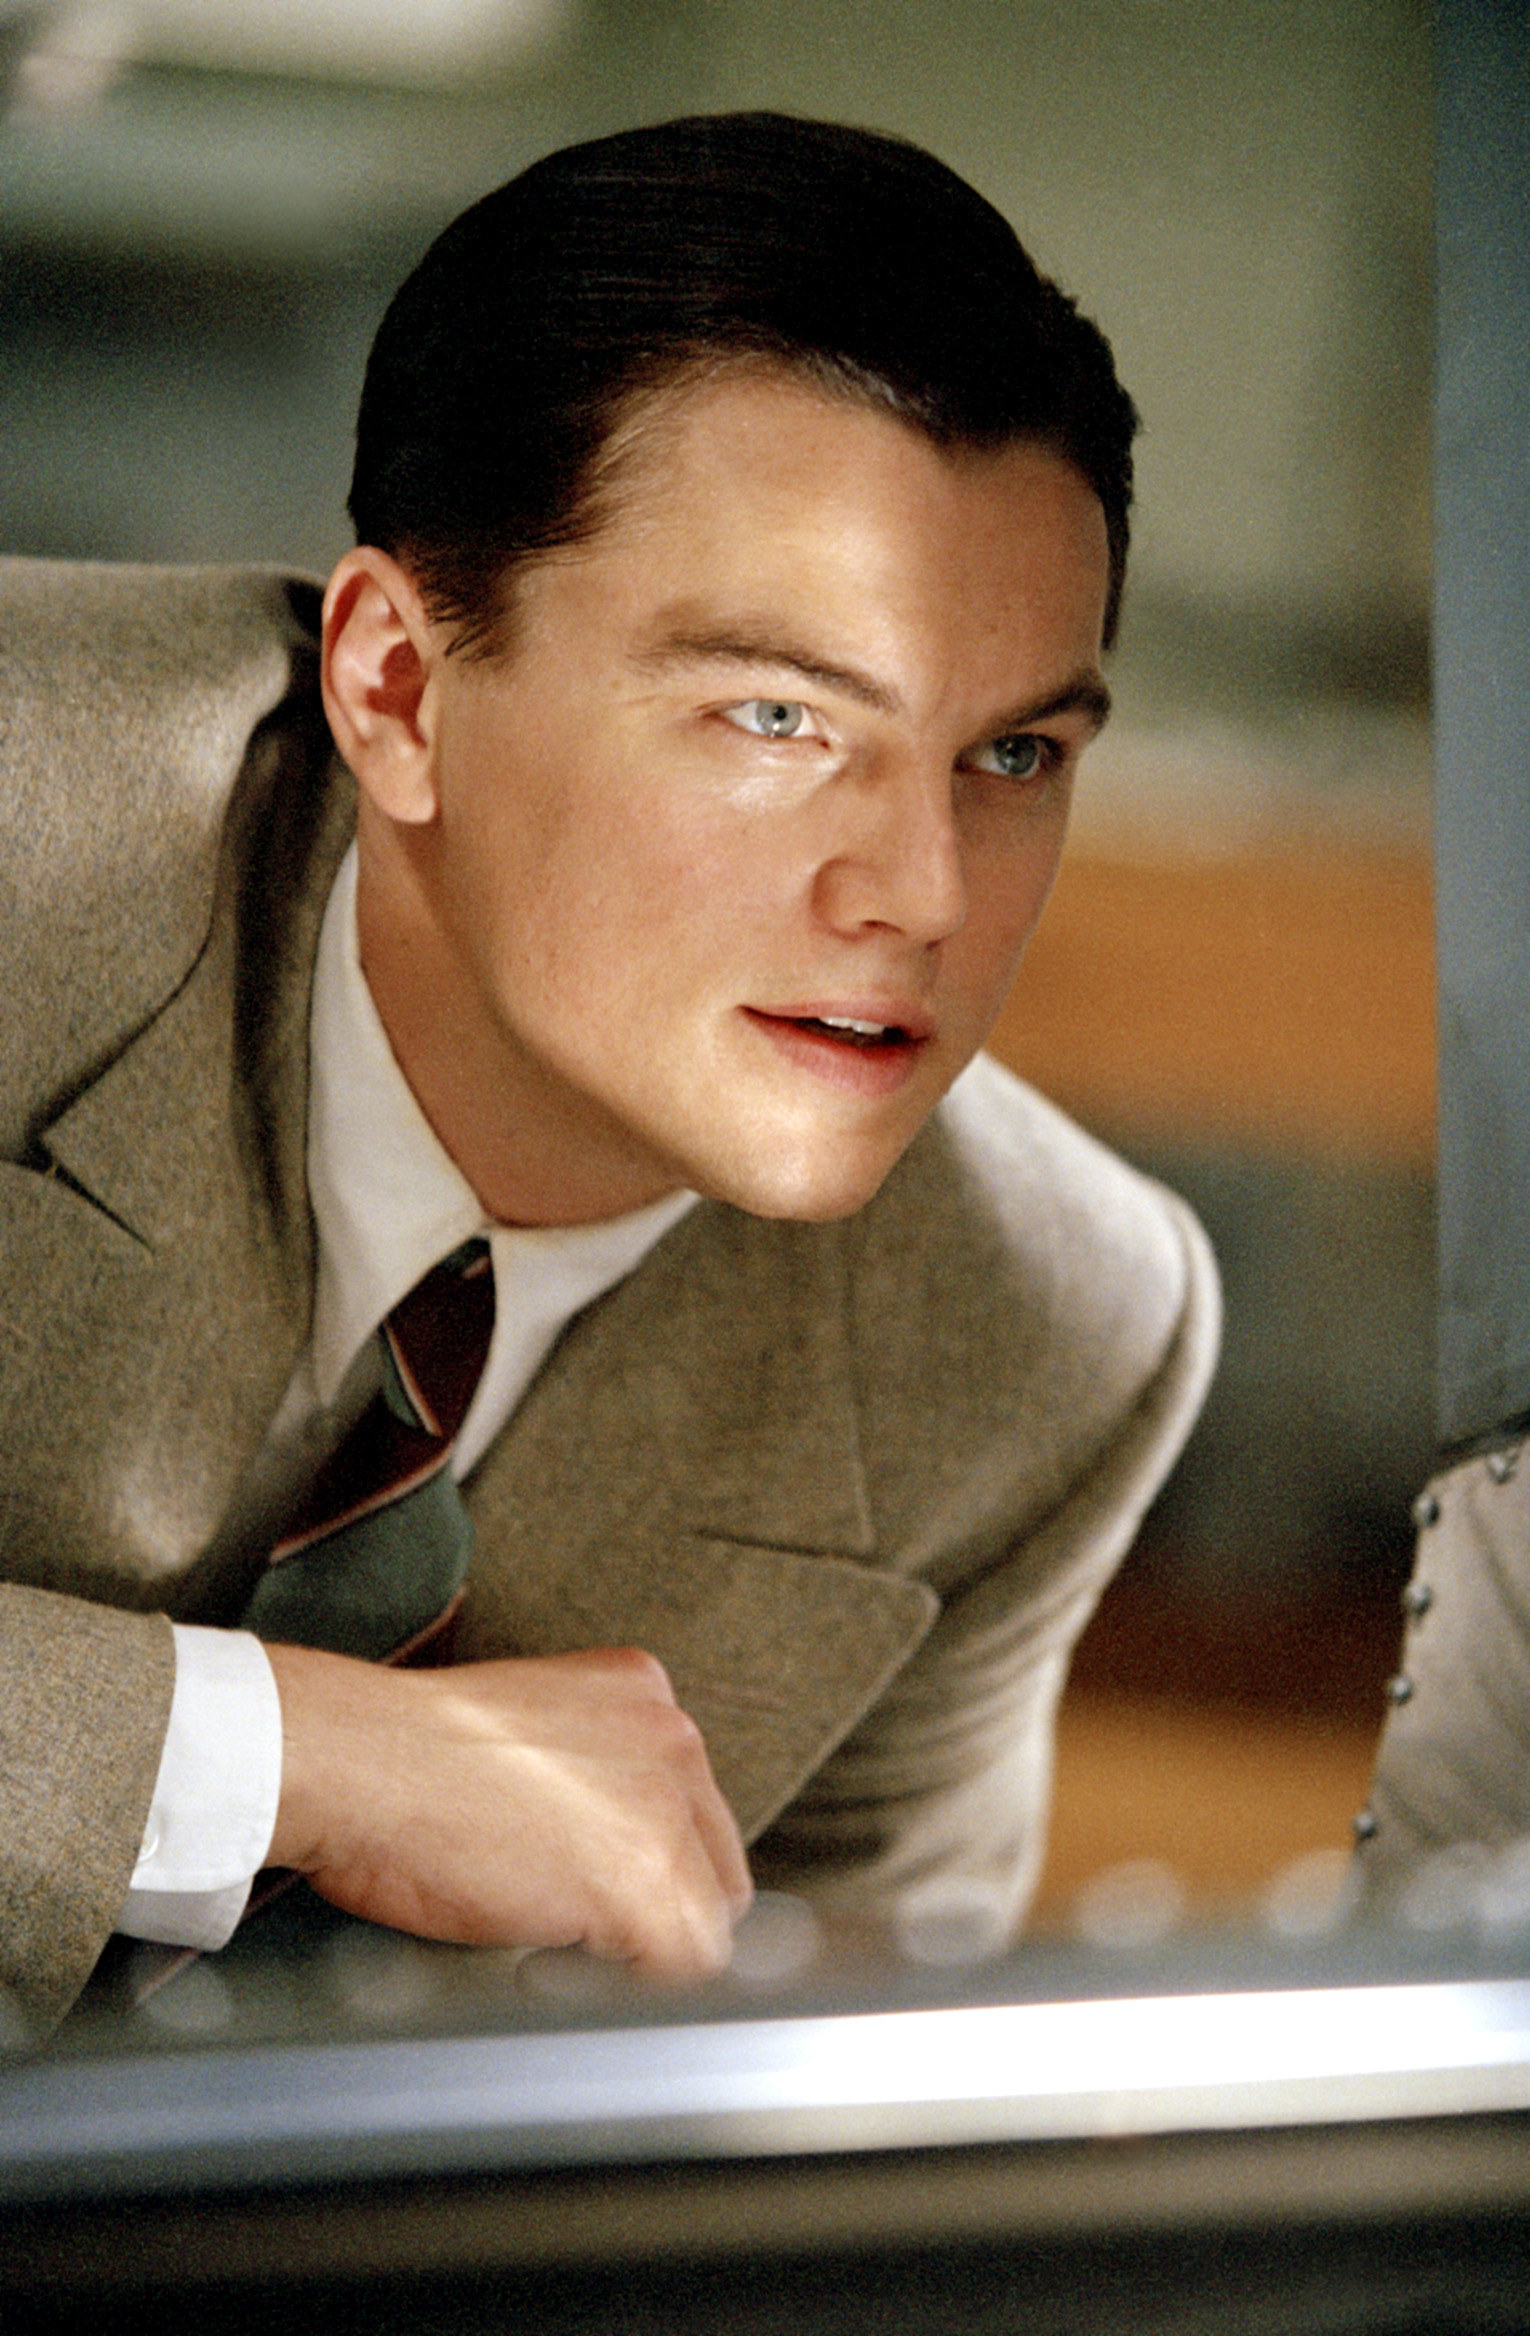 DiCaprio wearing a suit and tie